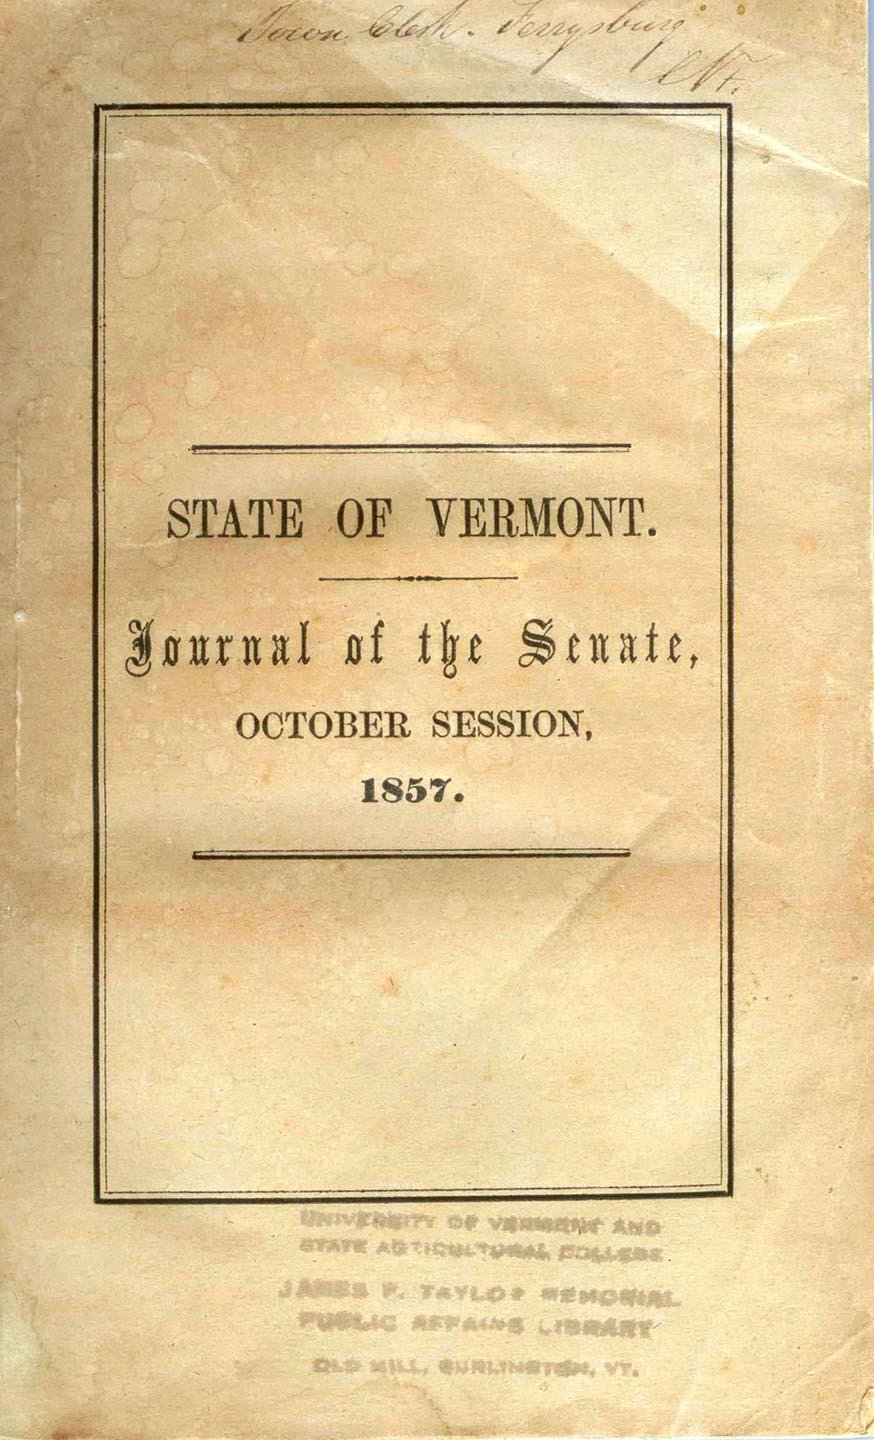 The Journal of the Senate of the State of Vermont, October Session, 1857